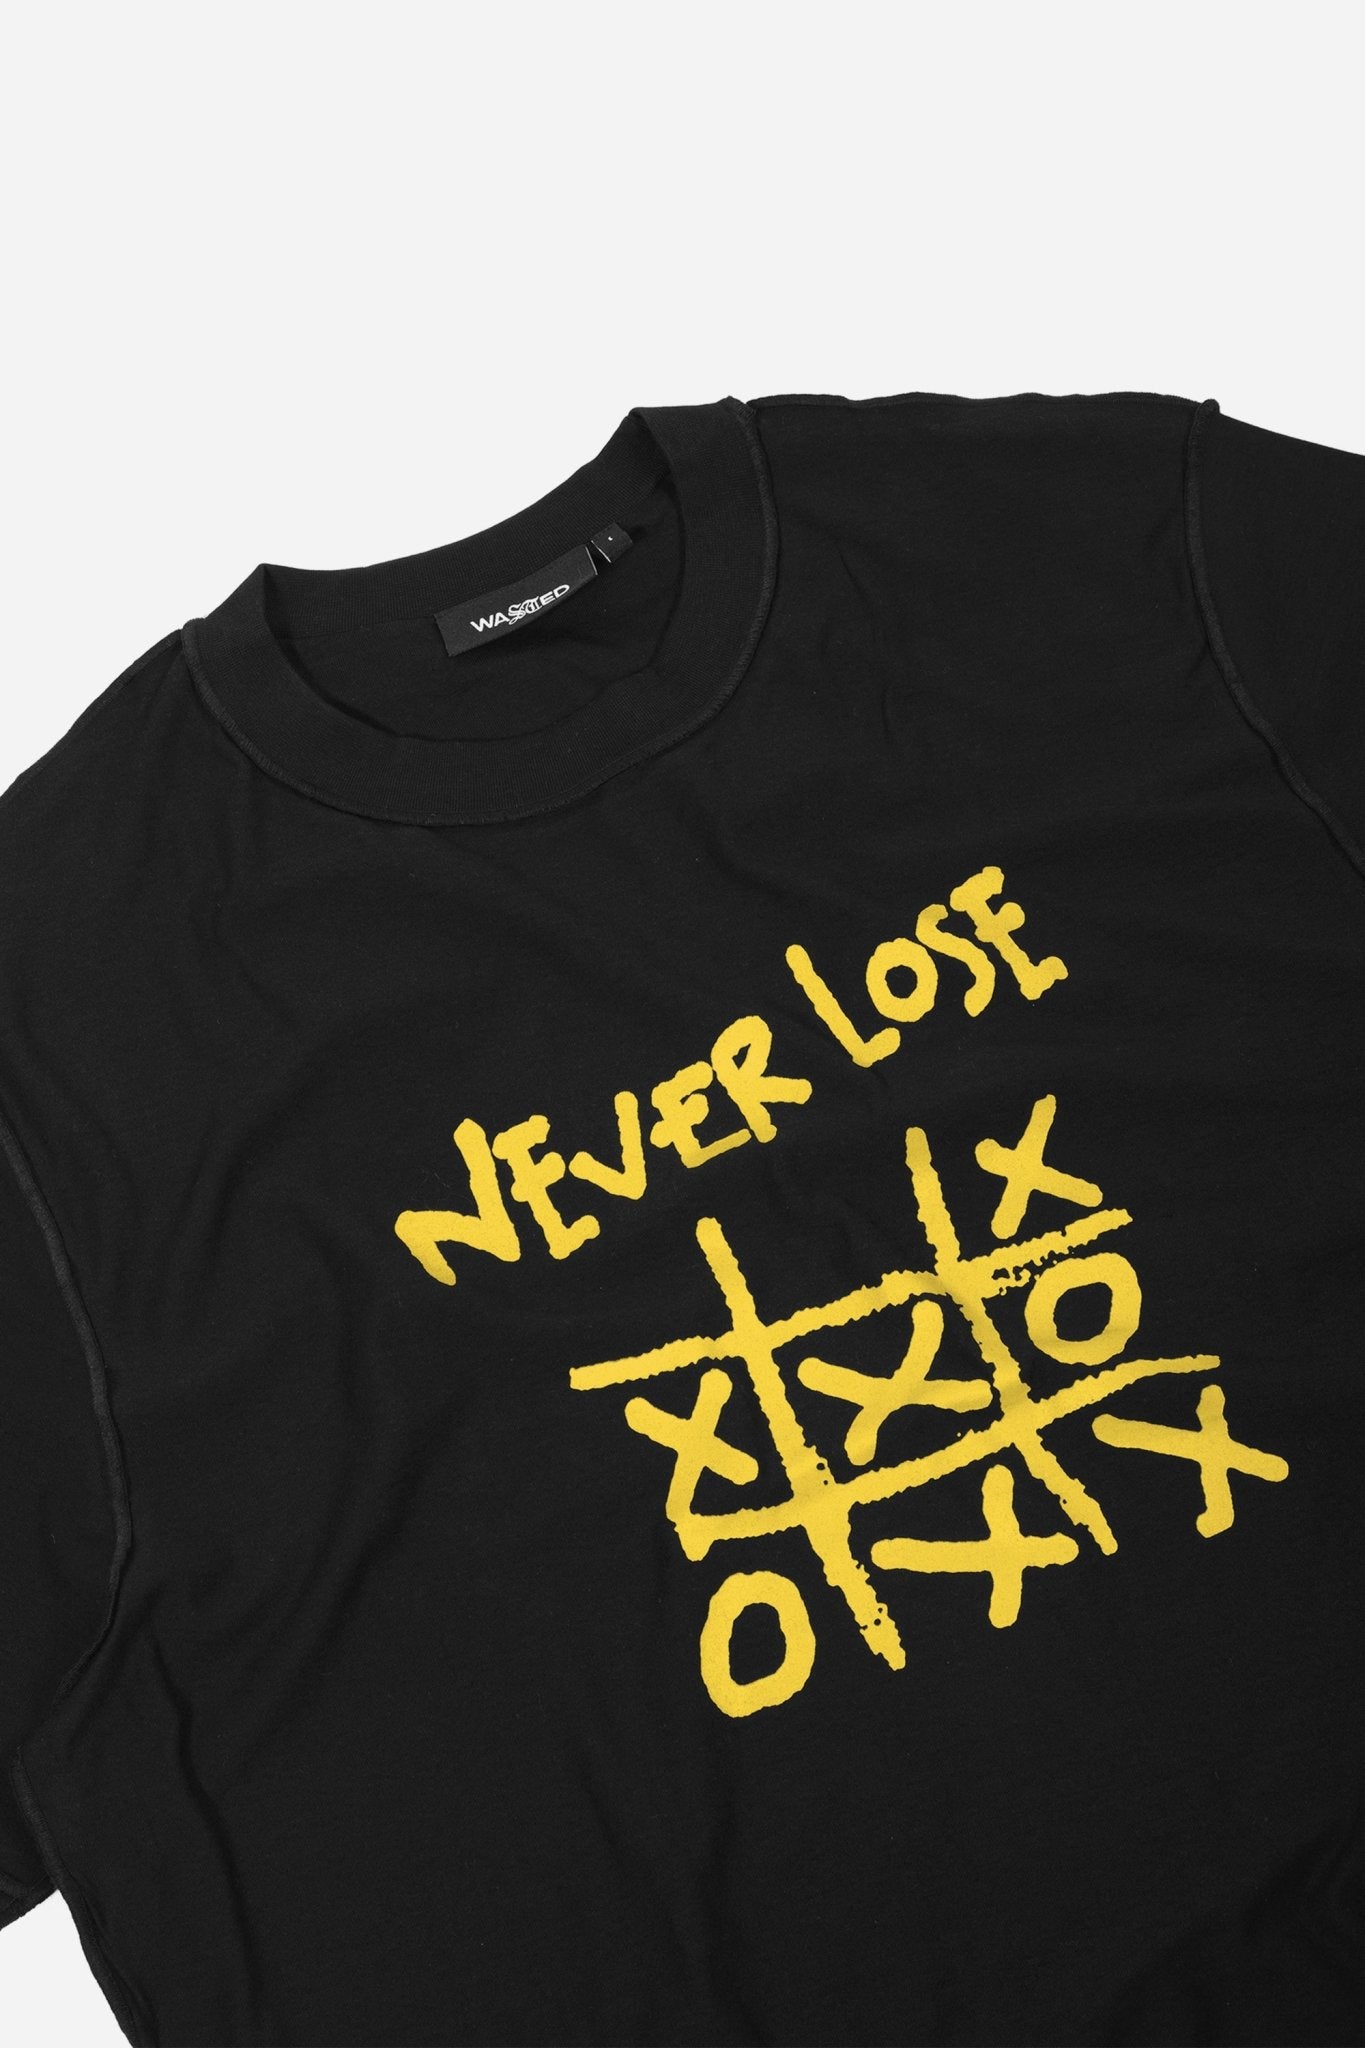 T-Shirt Never Lose - WASTED PARIS